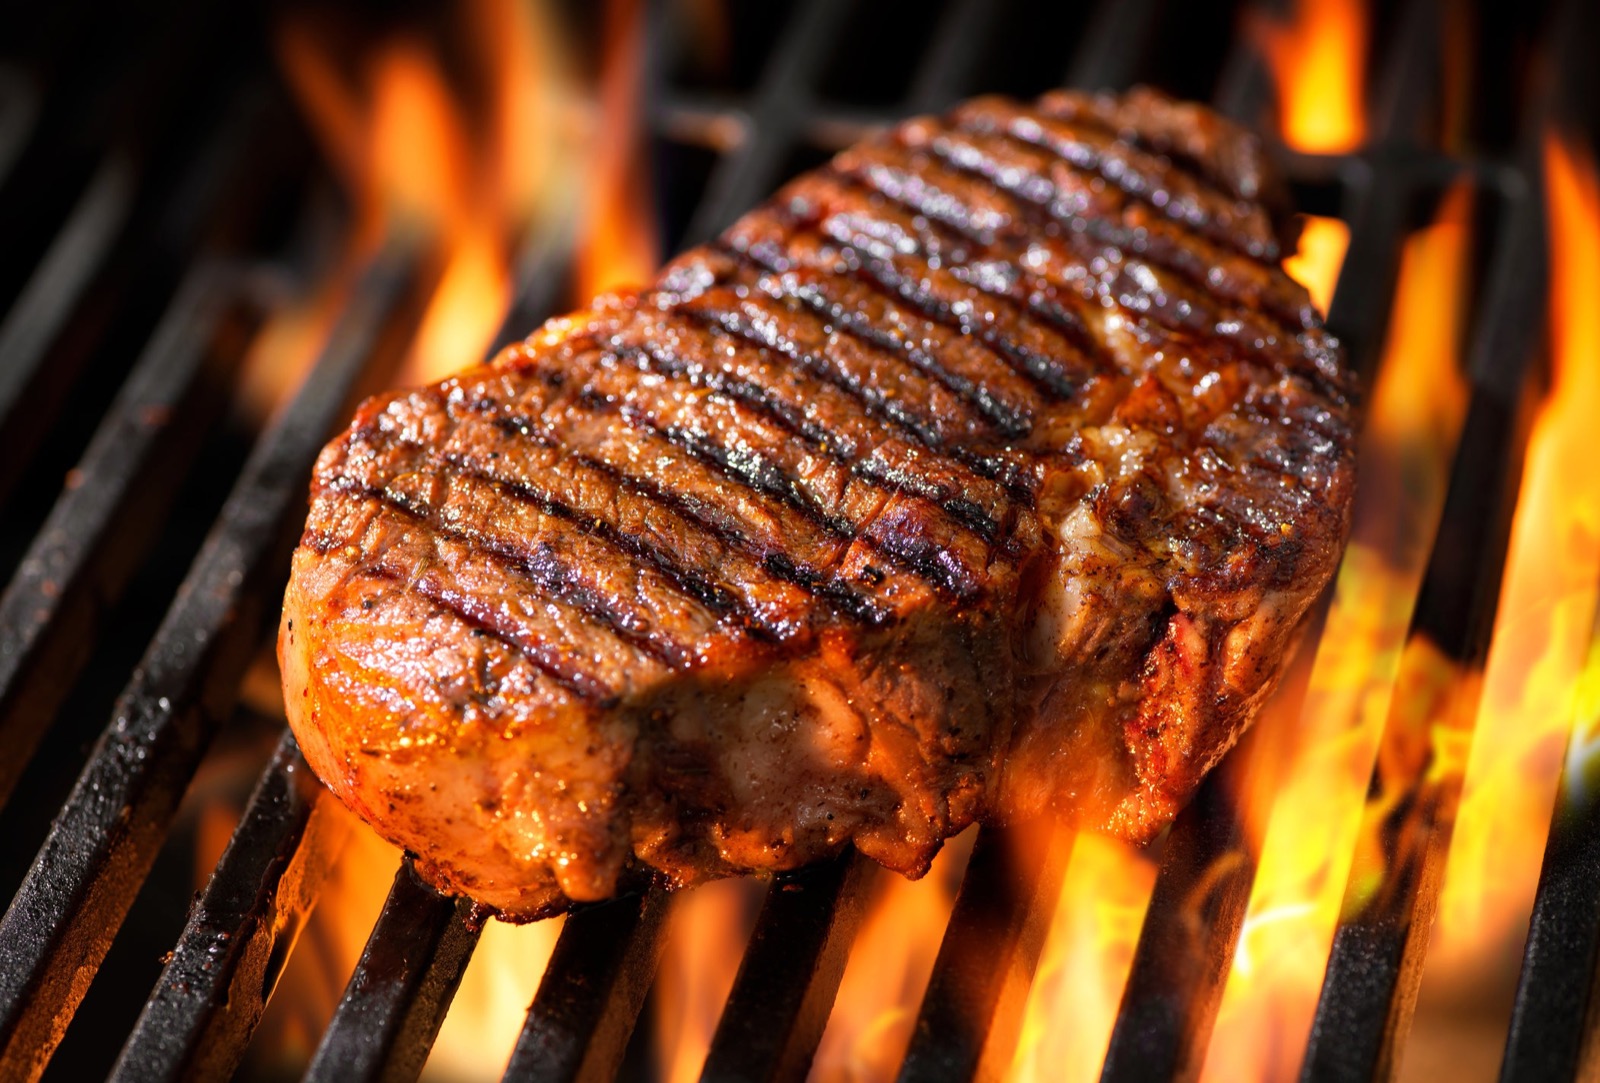 We Know Your Exact Age Based on the Foods You Love and Hate Flame Broiled Steak